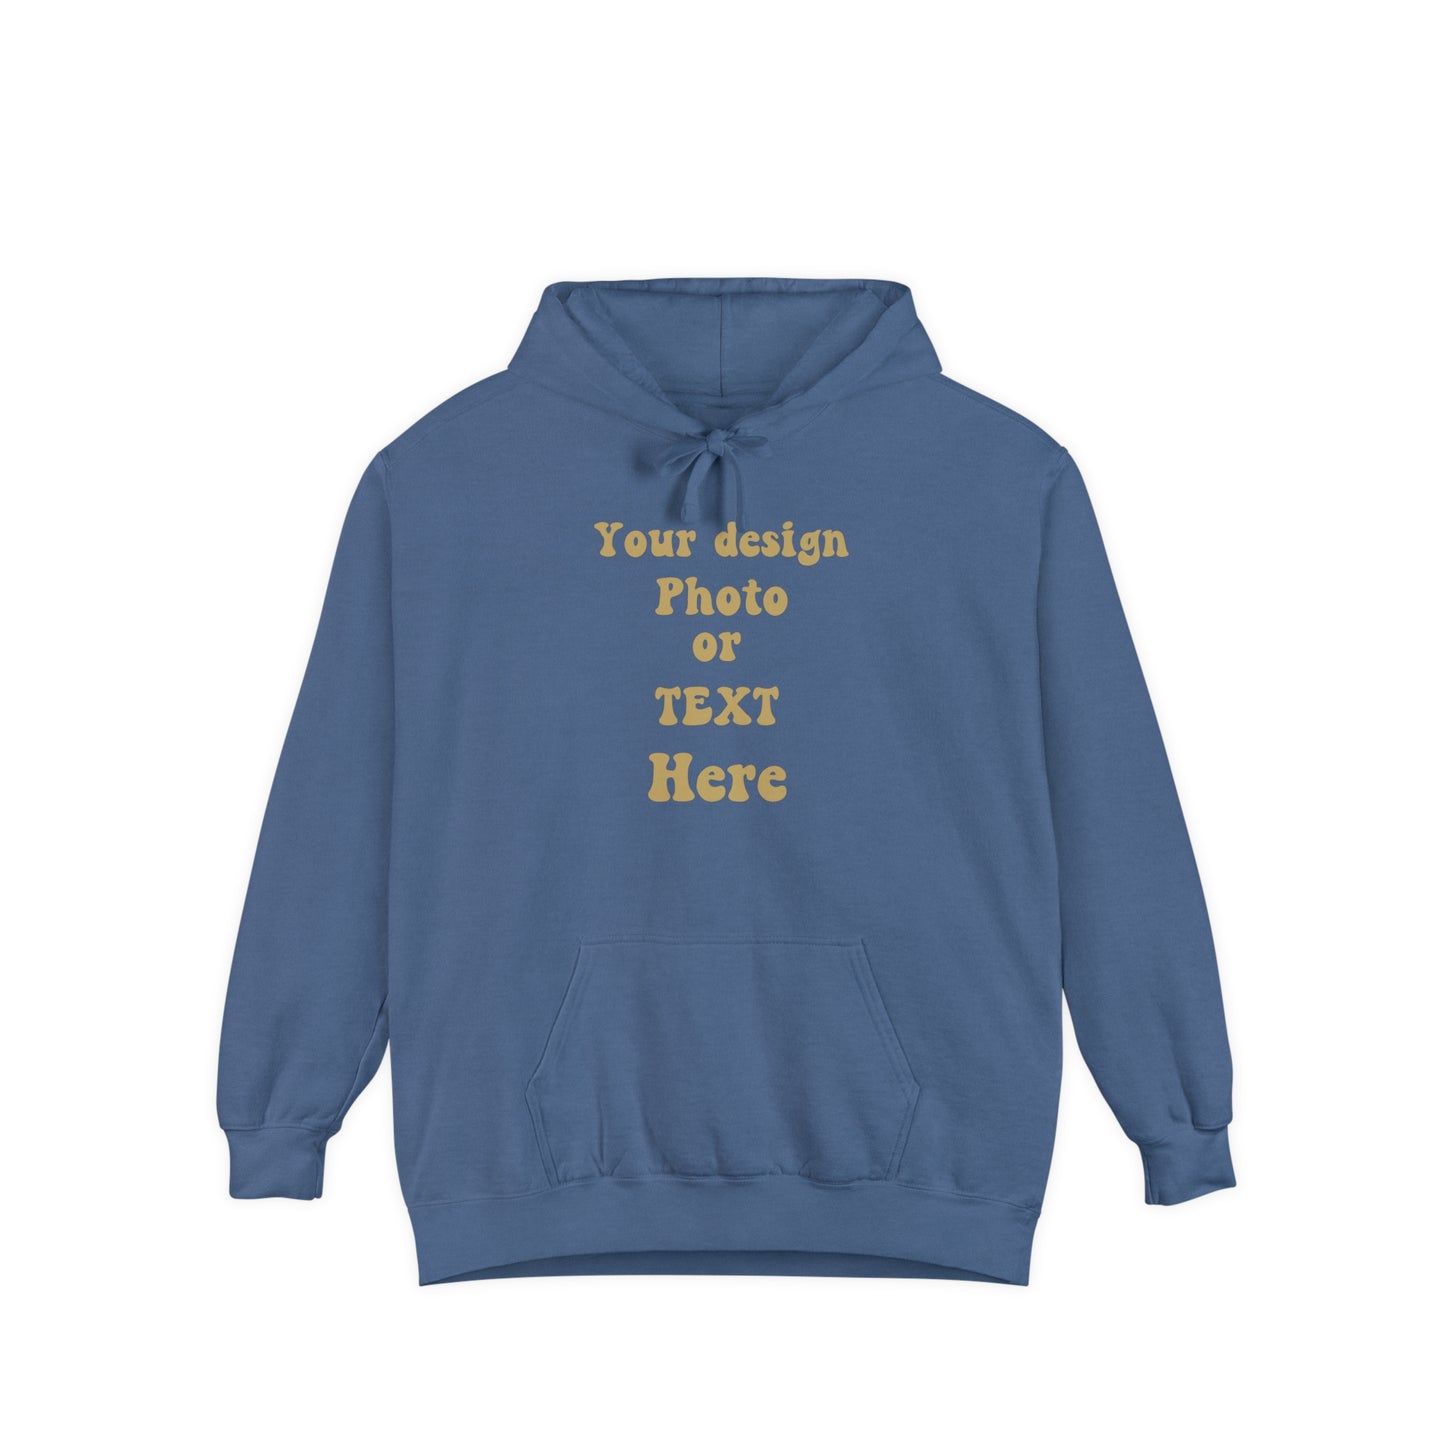 Luxury Hoodie - Personalize with Your Design, Photo, or Text | Greatest Comfort Hoodie True Navy S 